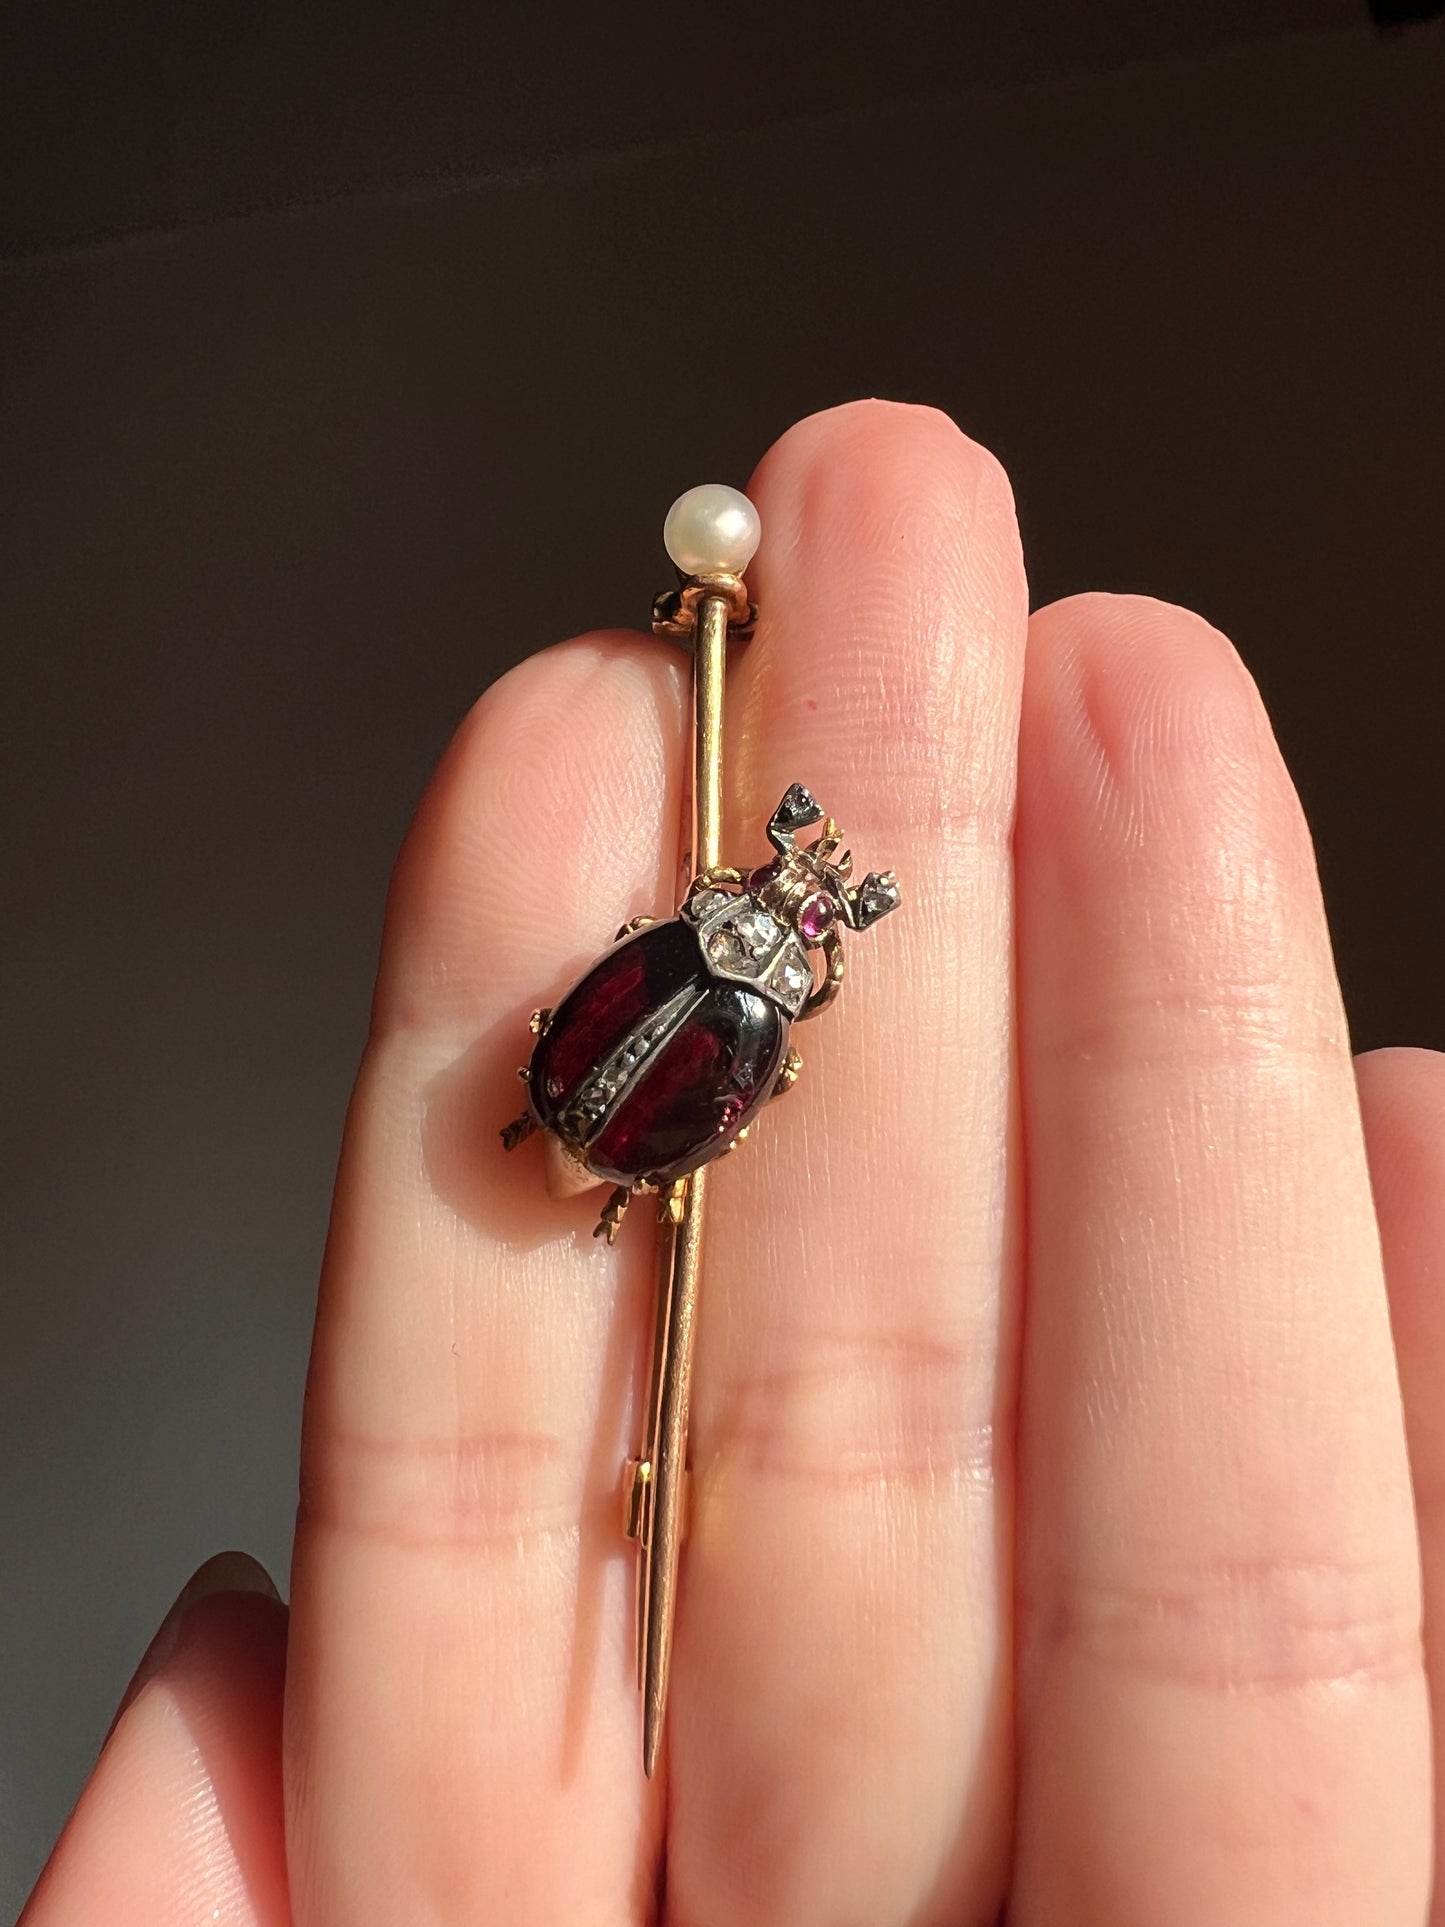 BUG Beetle GARNET Wing Rose Cut Diamond French Antique Victorian Figural Pin Brooch for Pendant 18k Gold